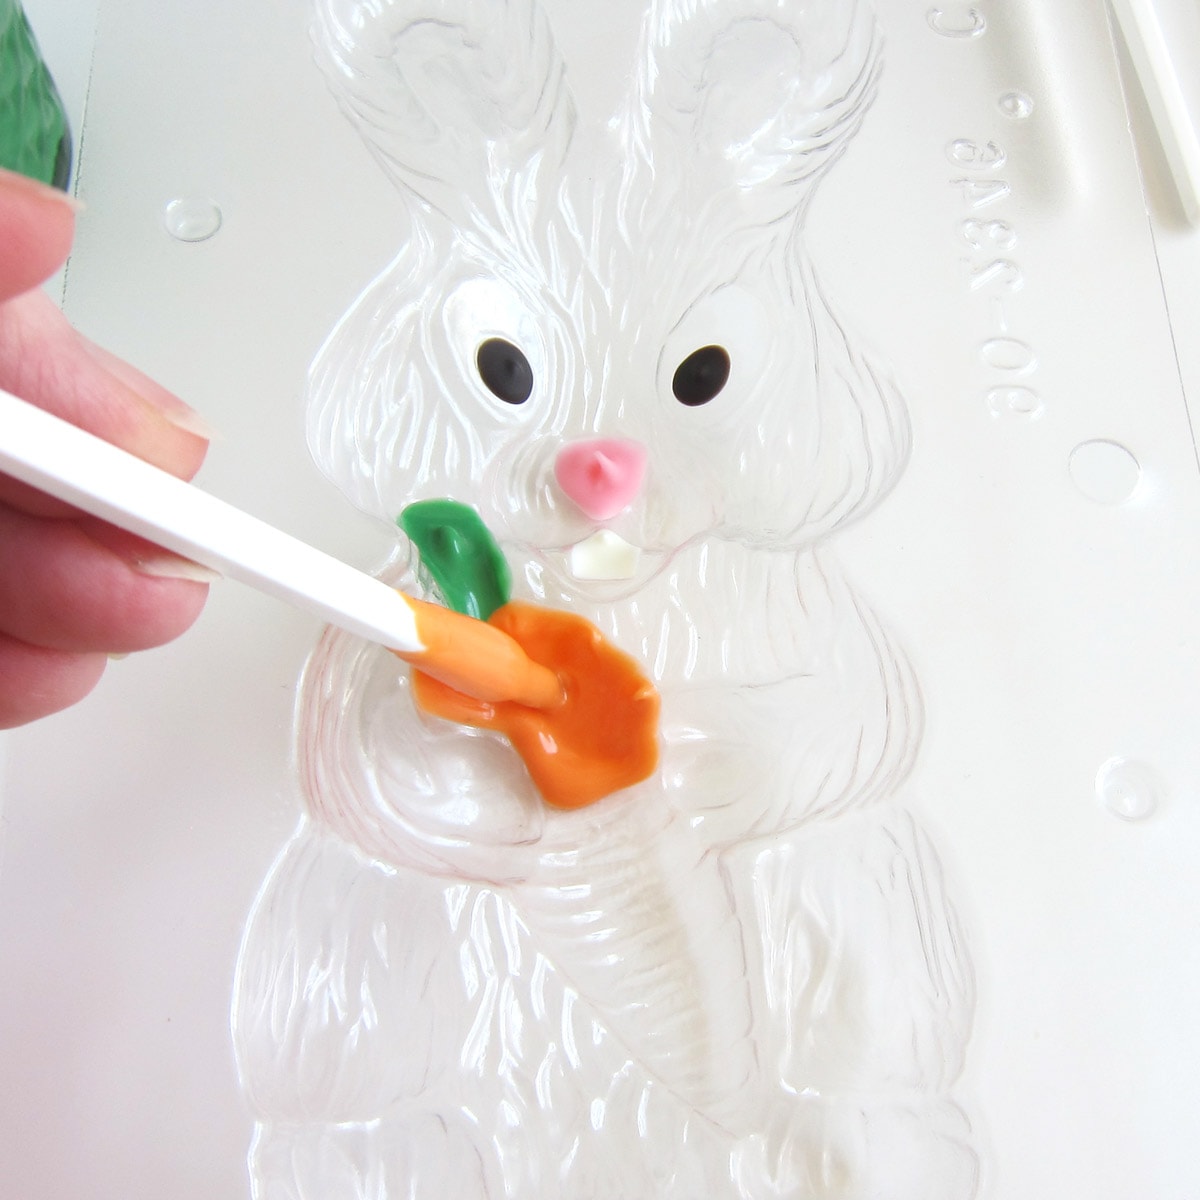 Painting orange candy melts into the bunny with carrot candy mold.